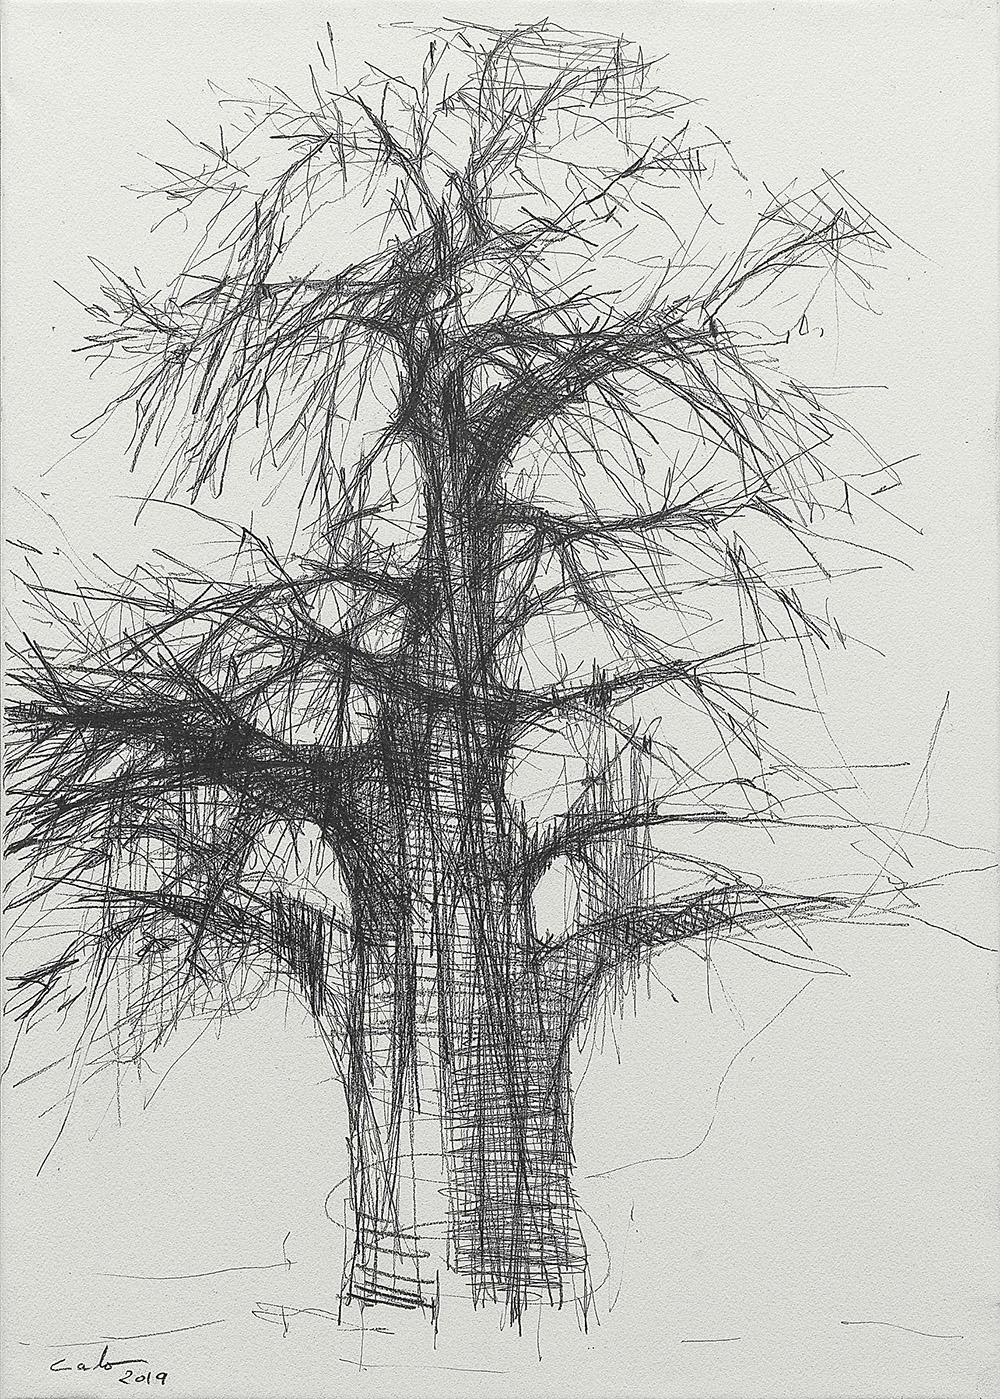 Baobab N3 is a unique graphite on paper mounted on a wood frame drawing by contemporary artist Calo Carratalá, dimensions are 65 × 46 cm (25.6 × 18.1 in). Dimensions of the framed artwork (methacrylate box) : 67 cm x 48 cm x 4 cm (26.3 x 18.8 x 1.5